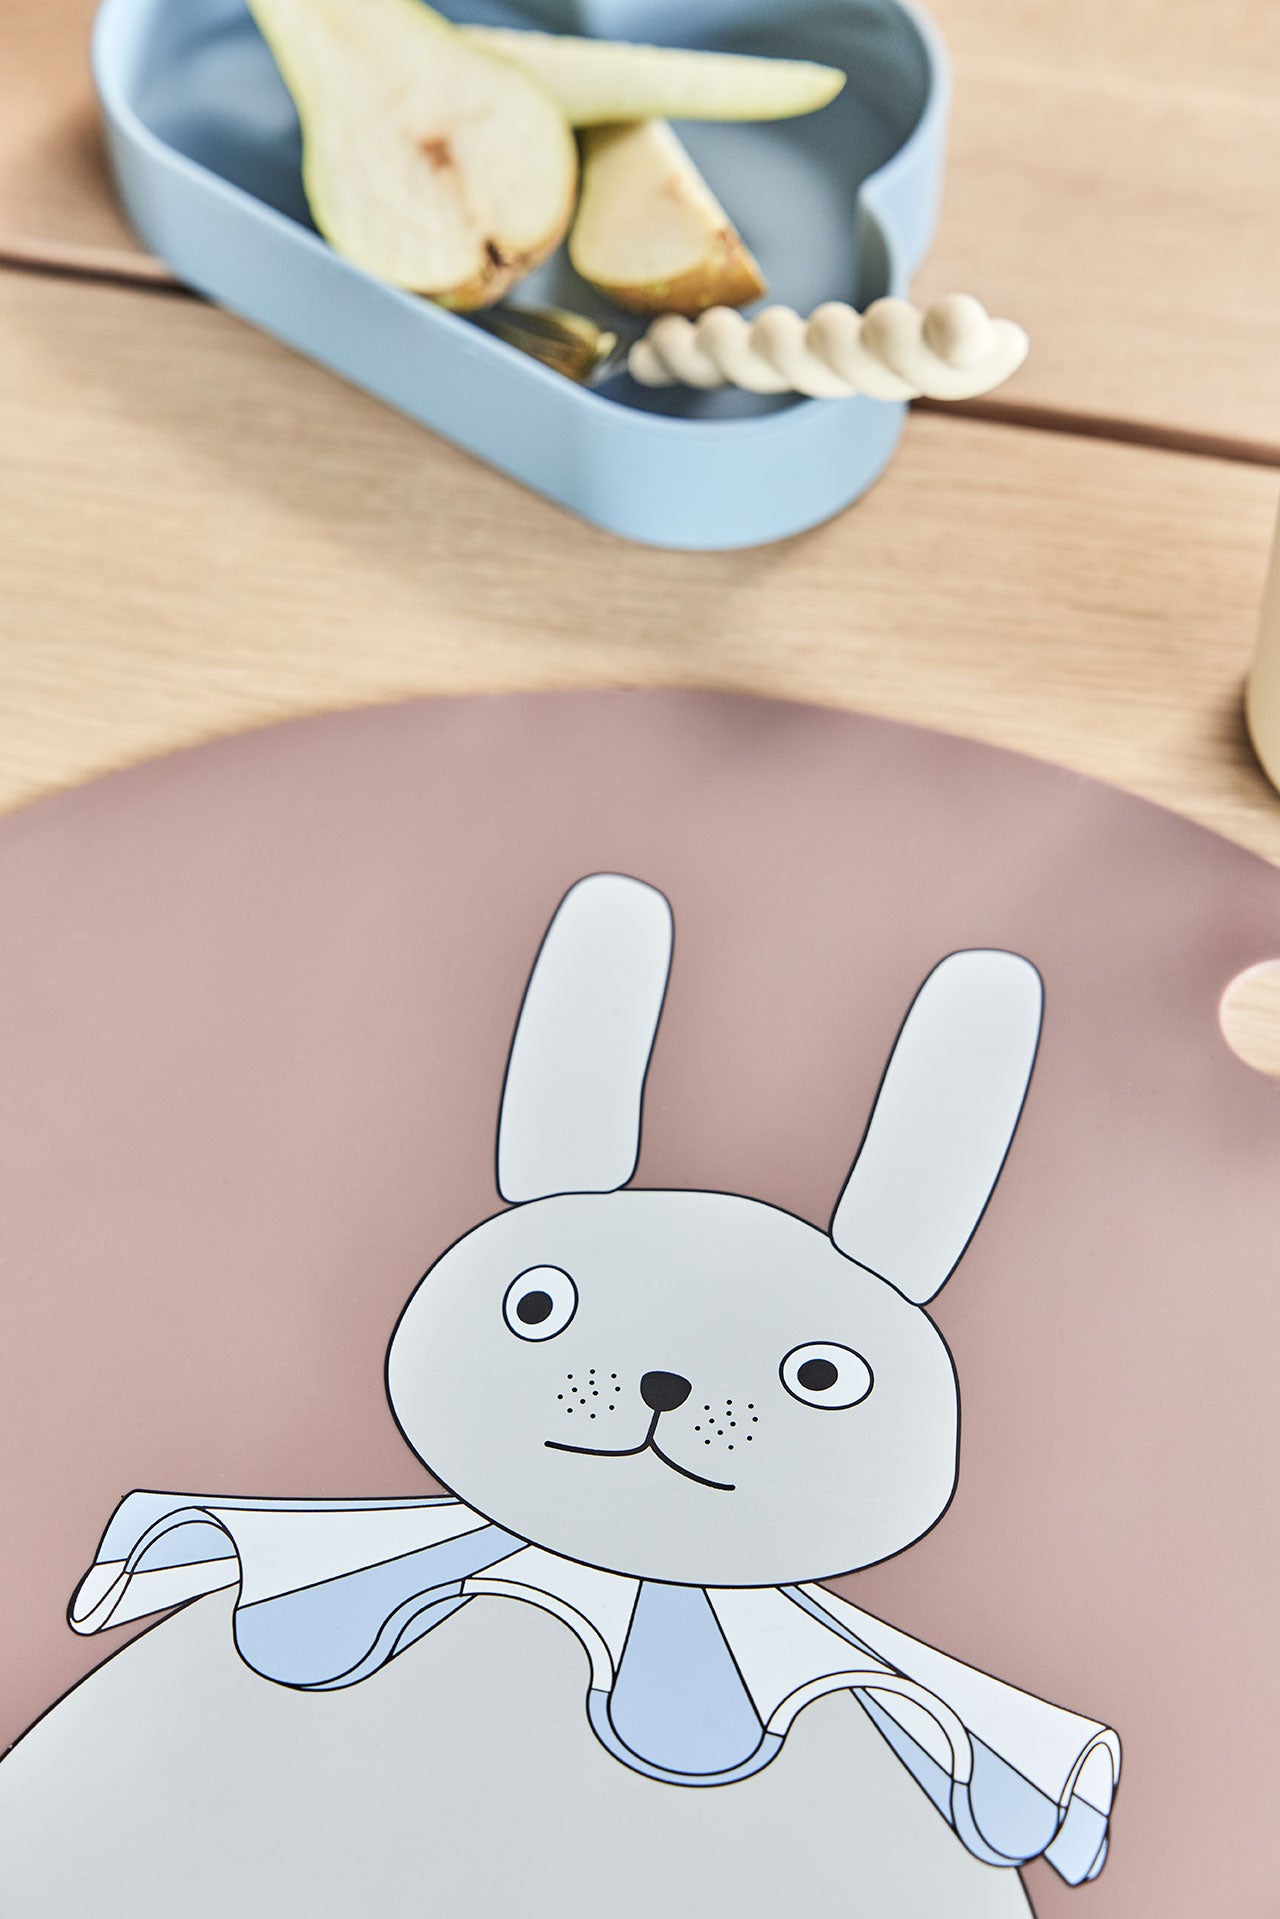 OYOY MINI Placemat Rabbit Pompom Placemat 306 Clay